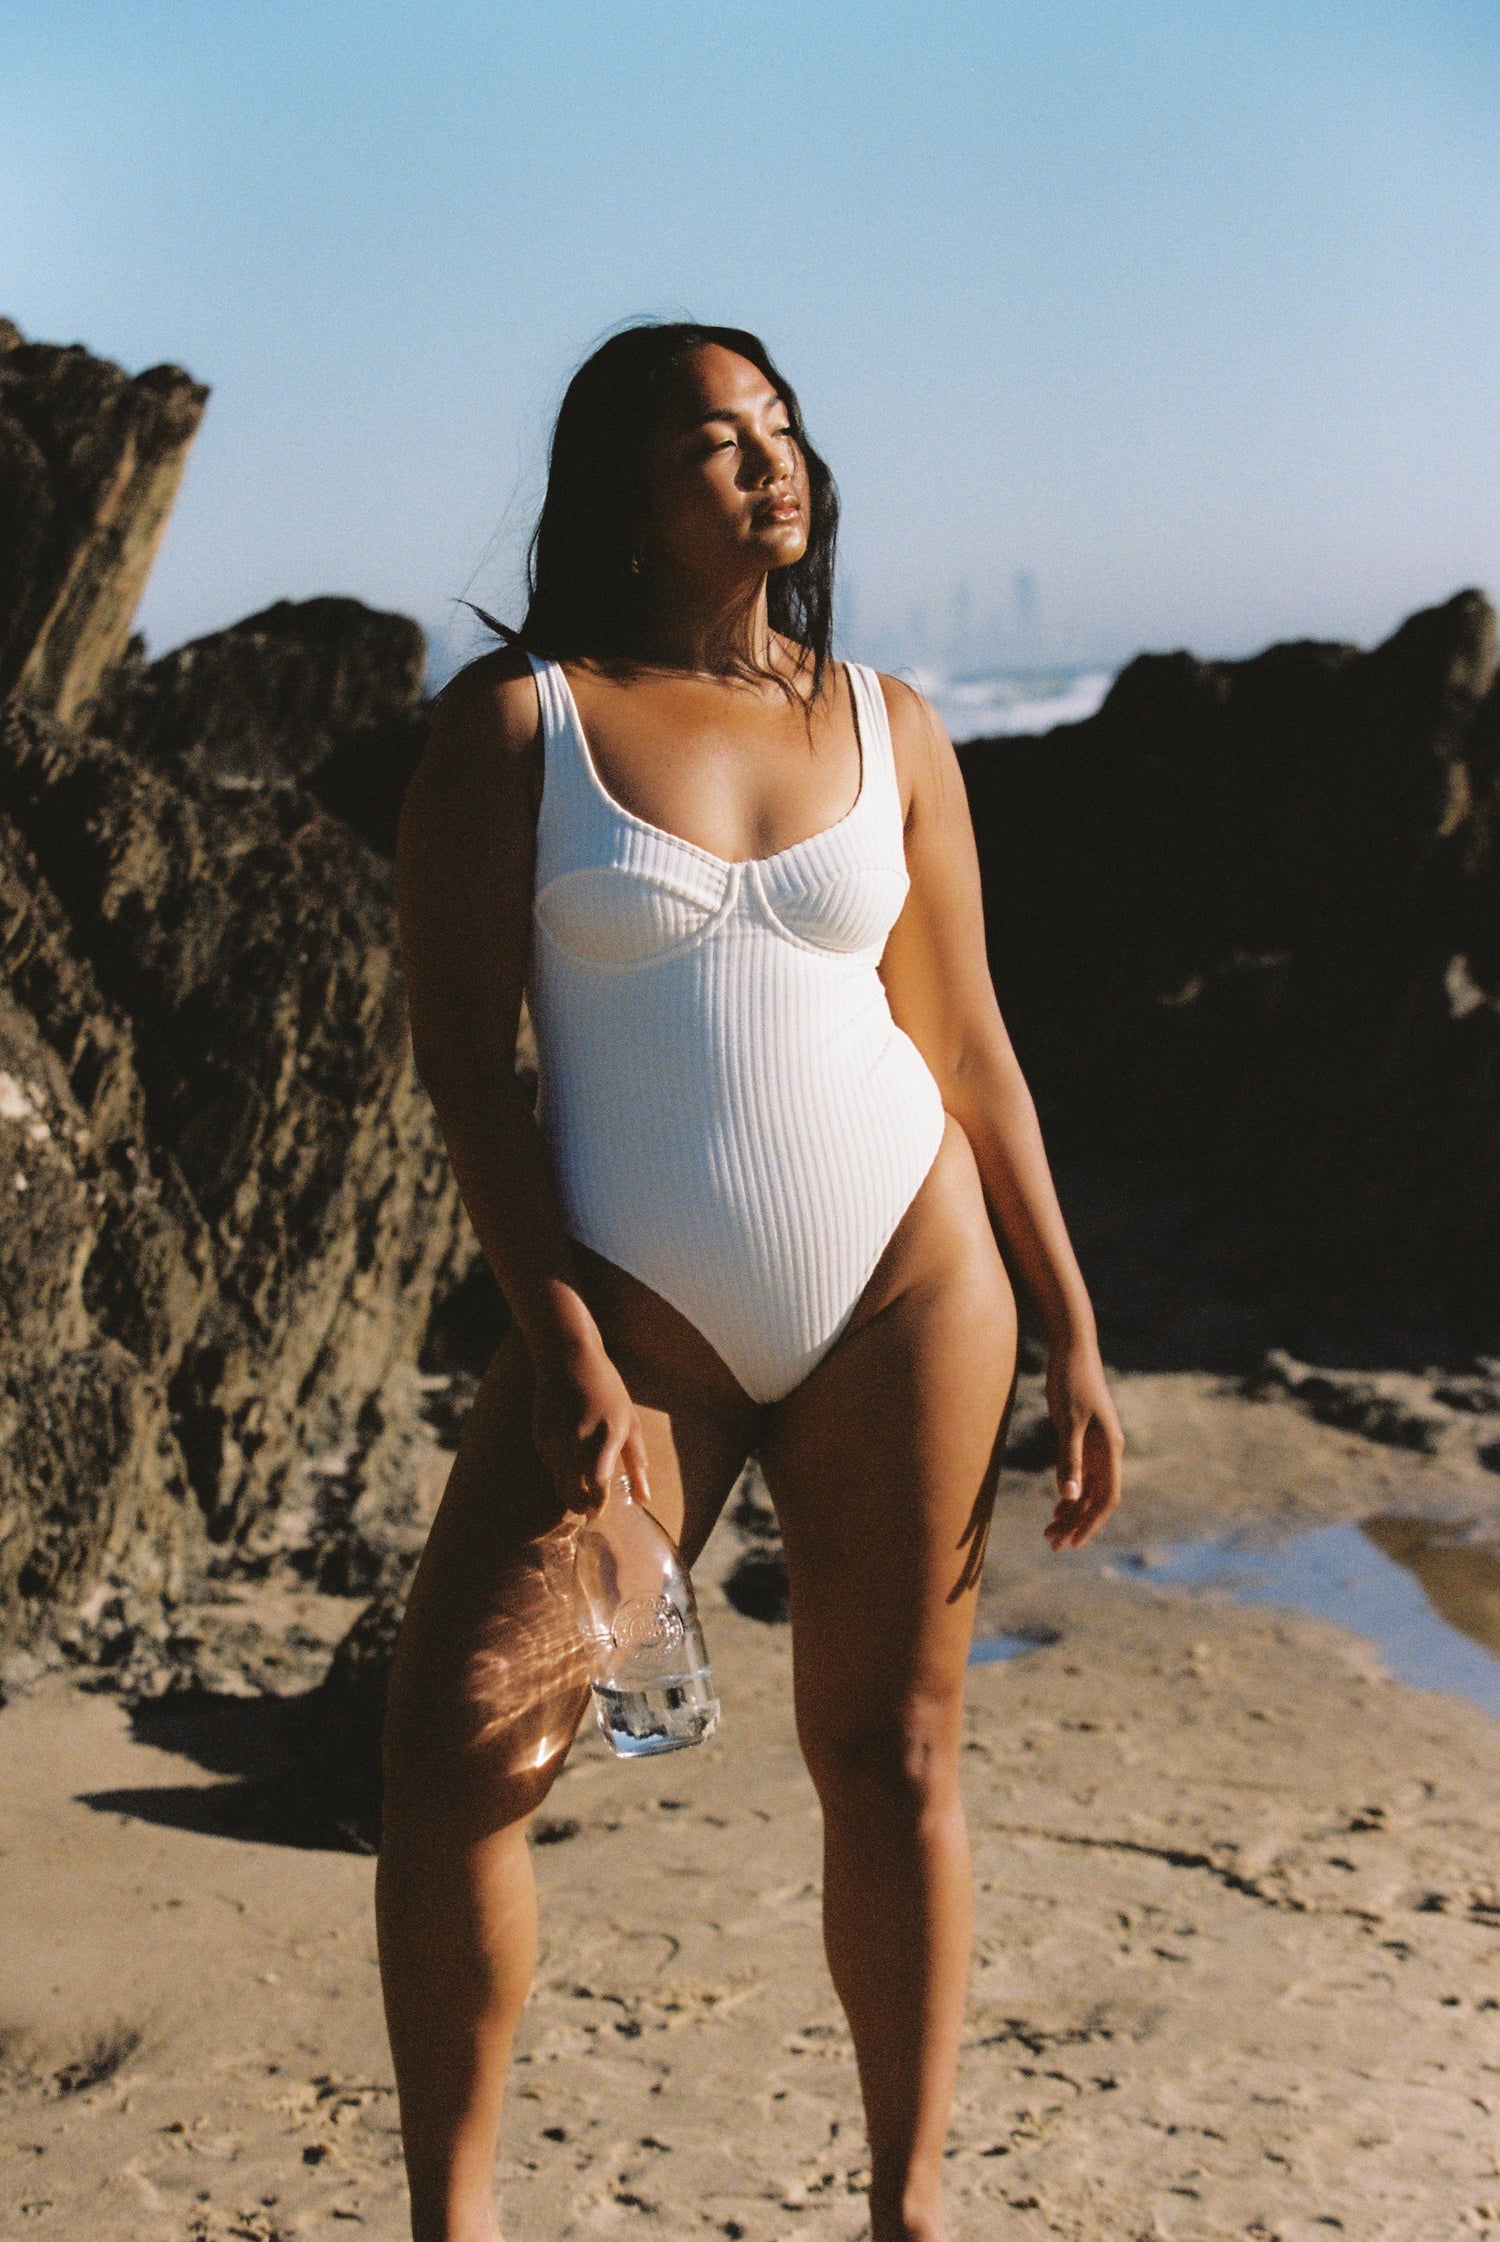 Ribbed Towelling One Piece | Crème